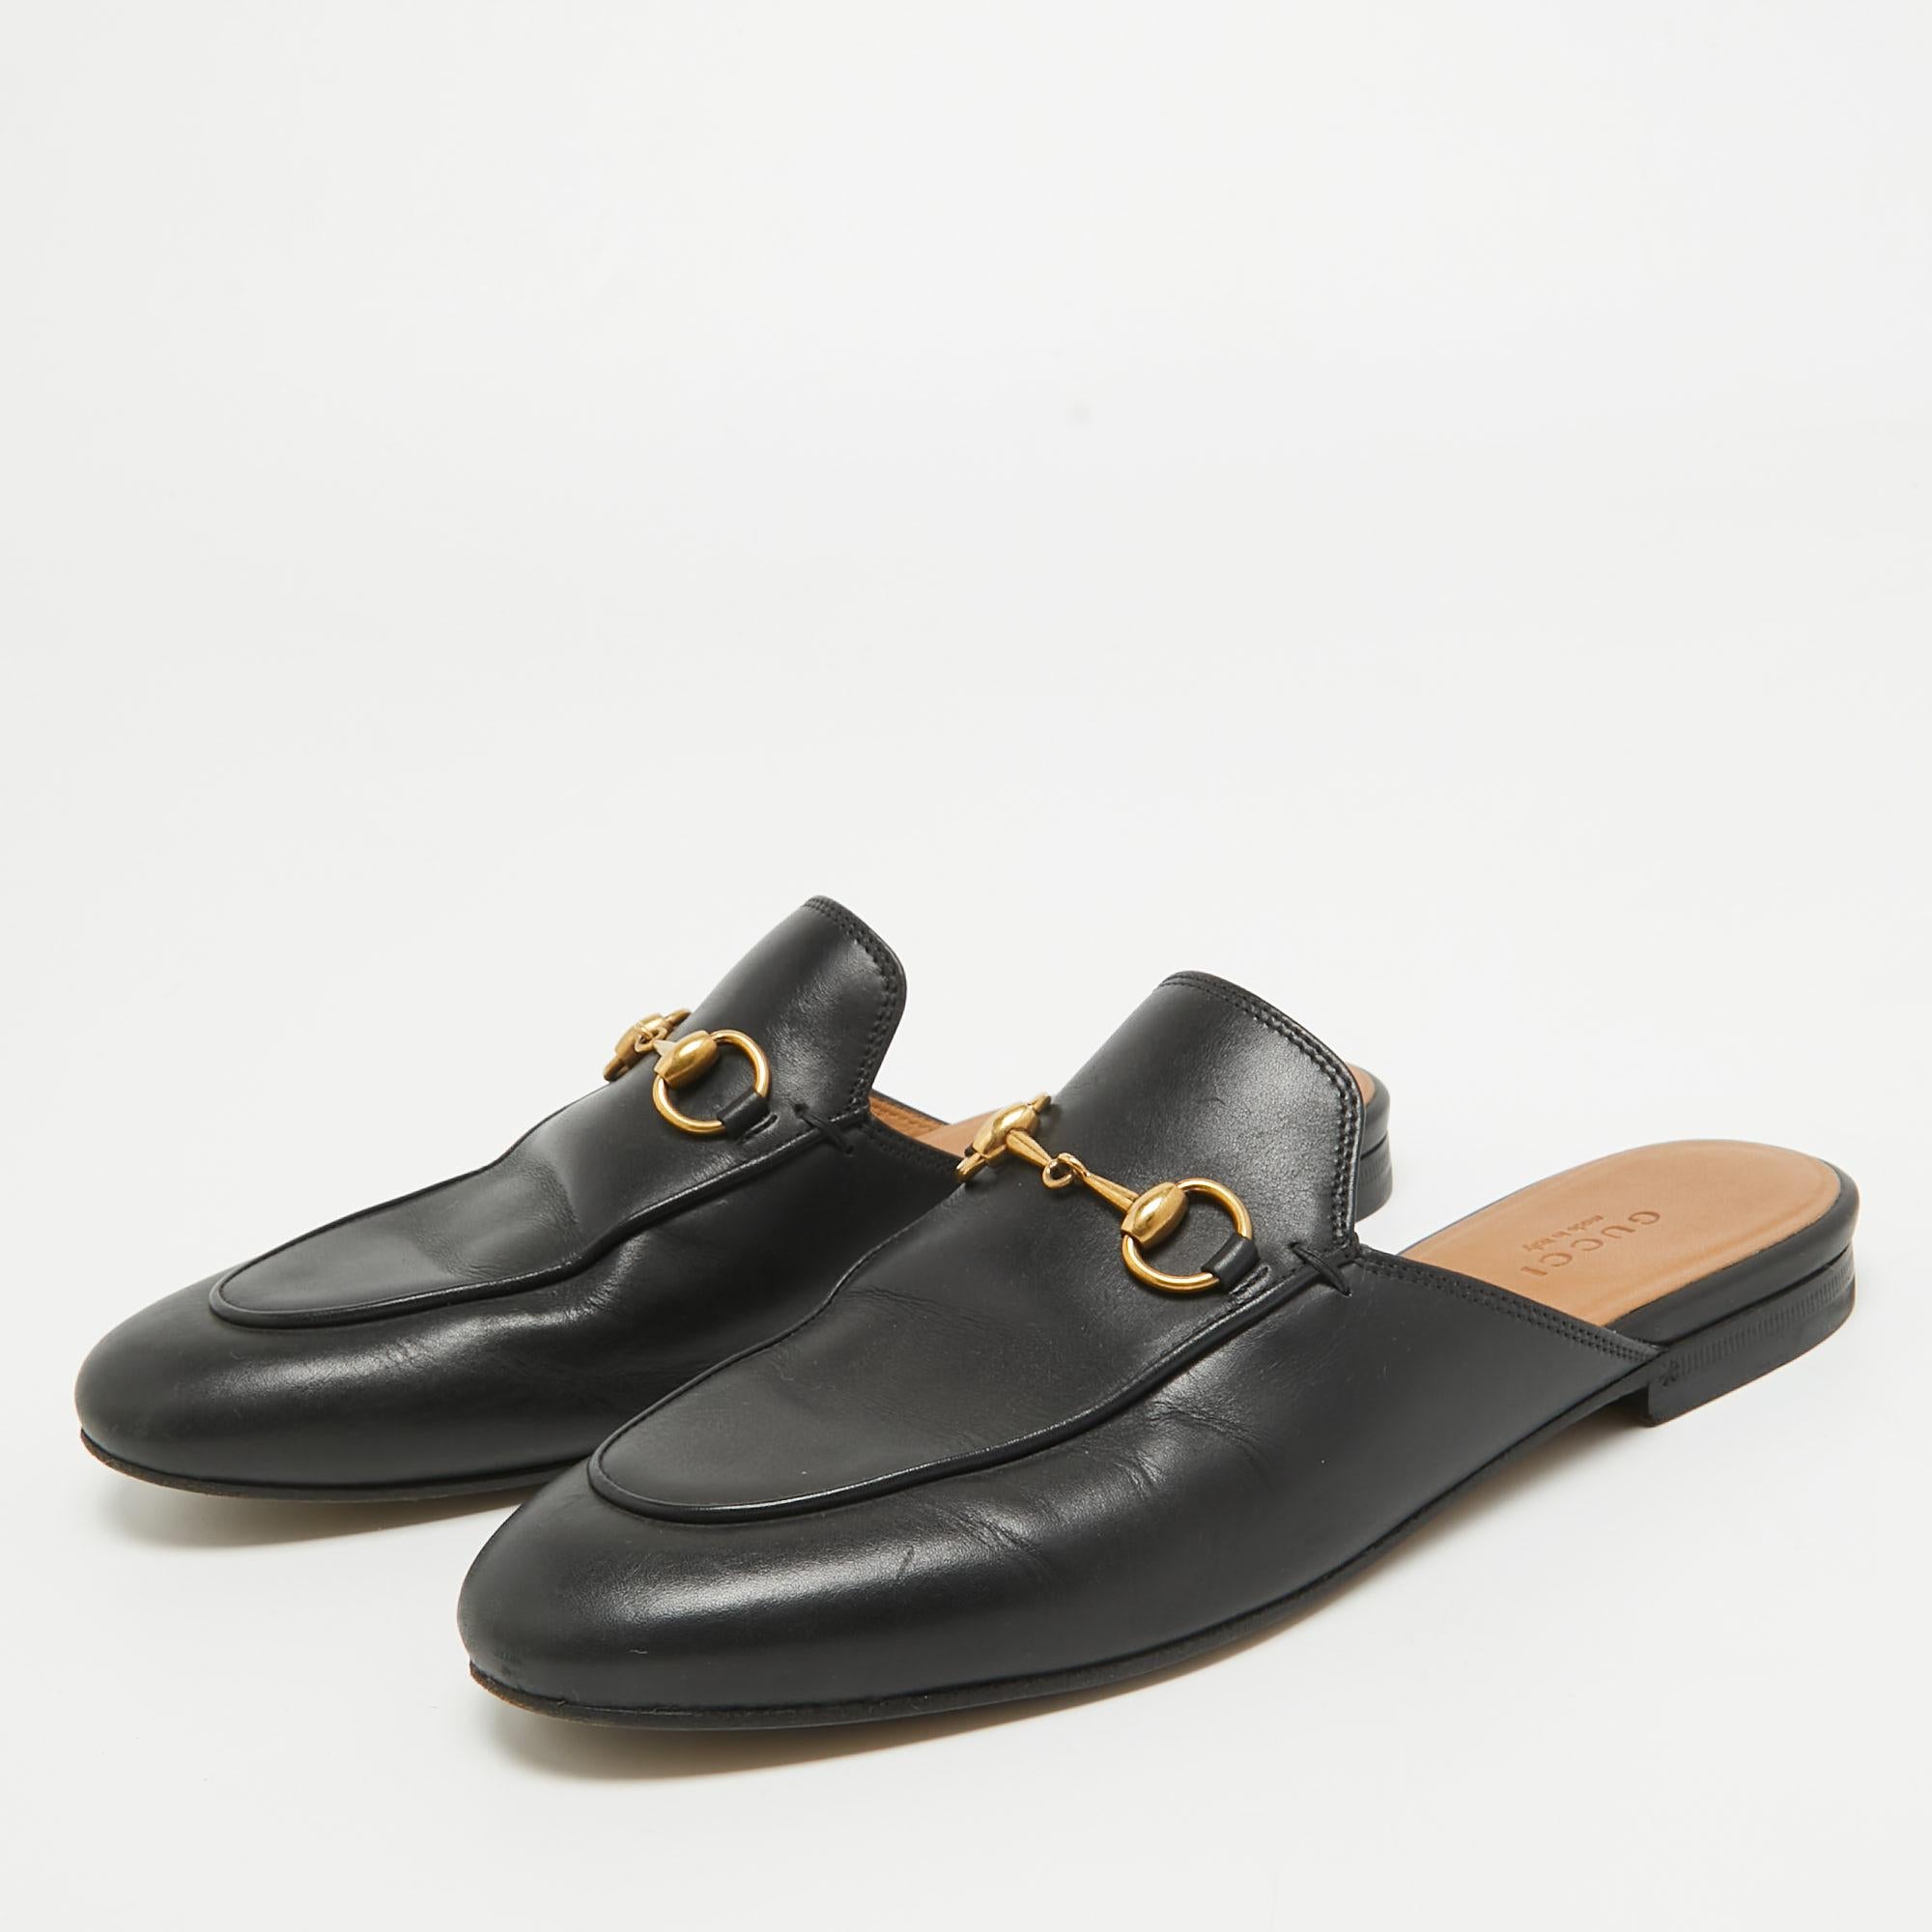 Gucci Black Leather Princetown Flat Mules Size 36.5 For Sale 2